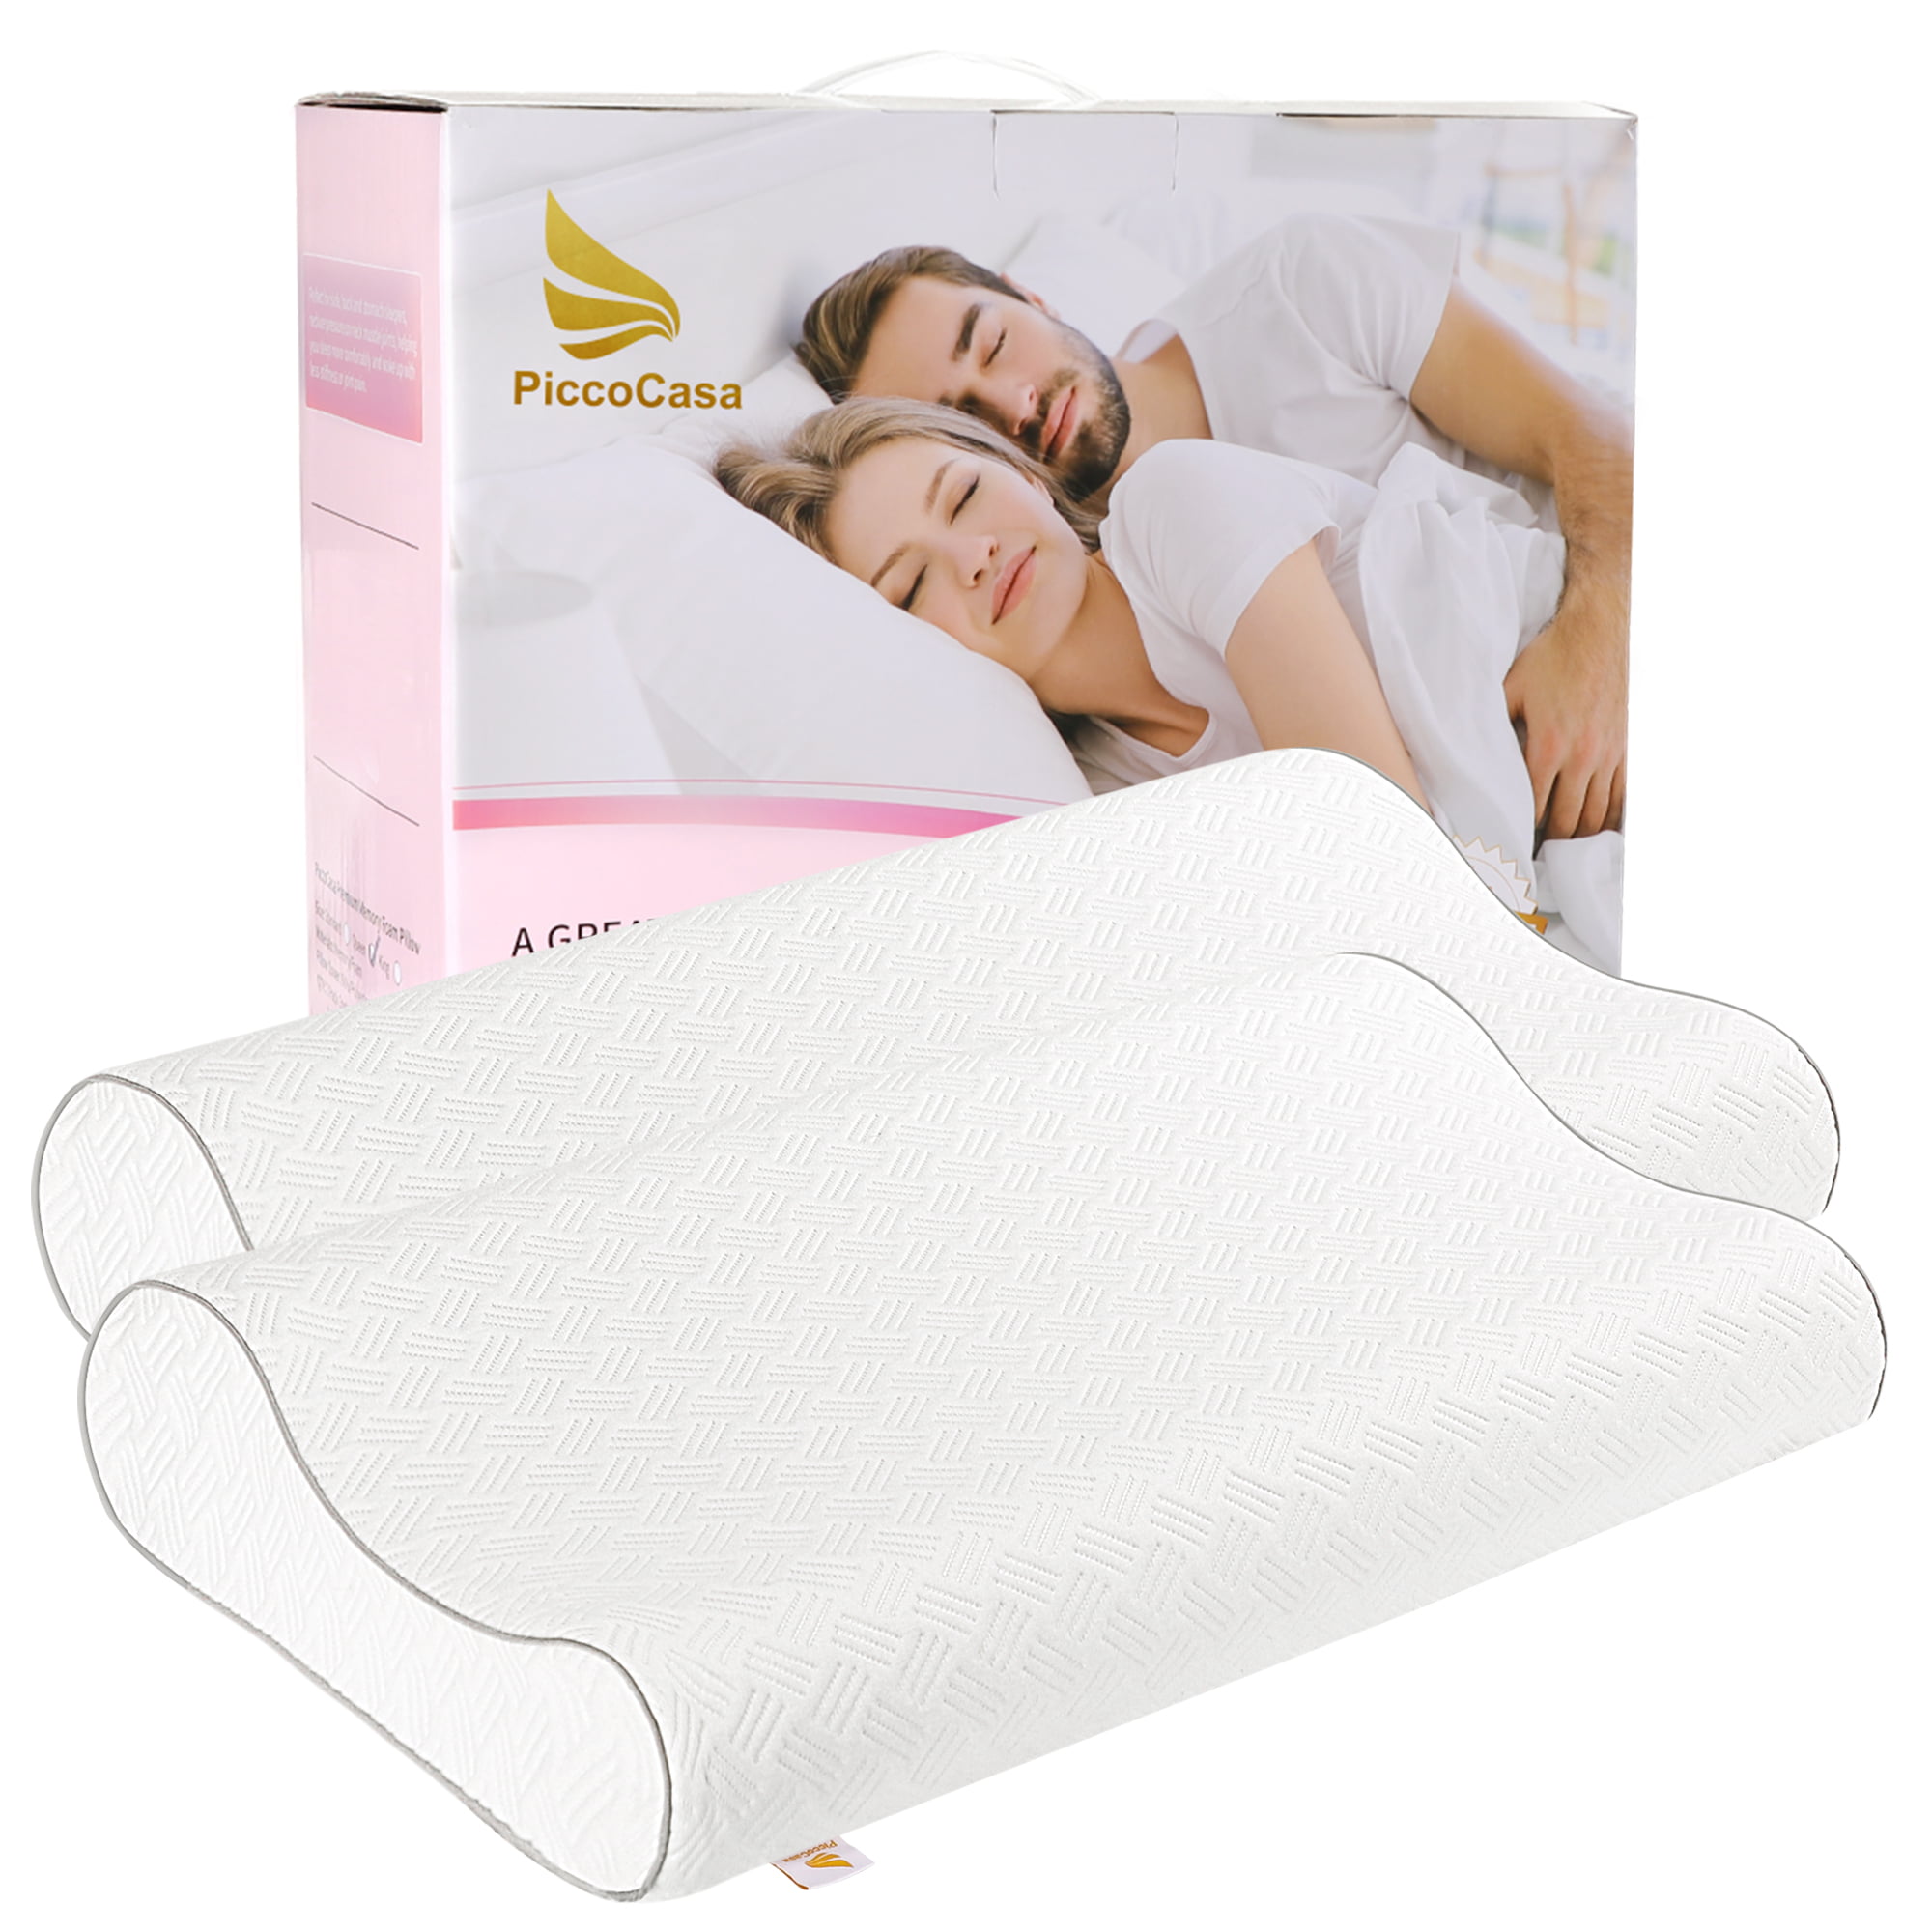 2 x Orthopaedic Memory Foam Pillow Firm Head Neck Back Support Anti Allergy 